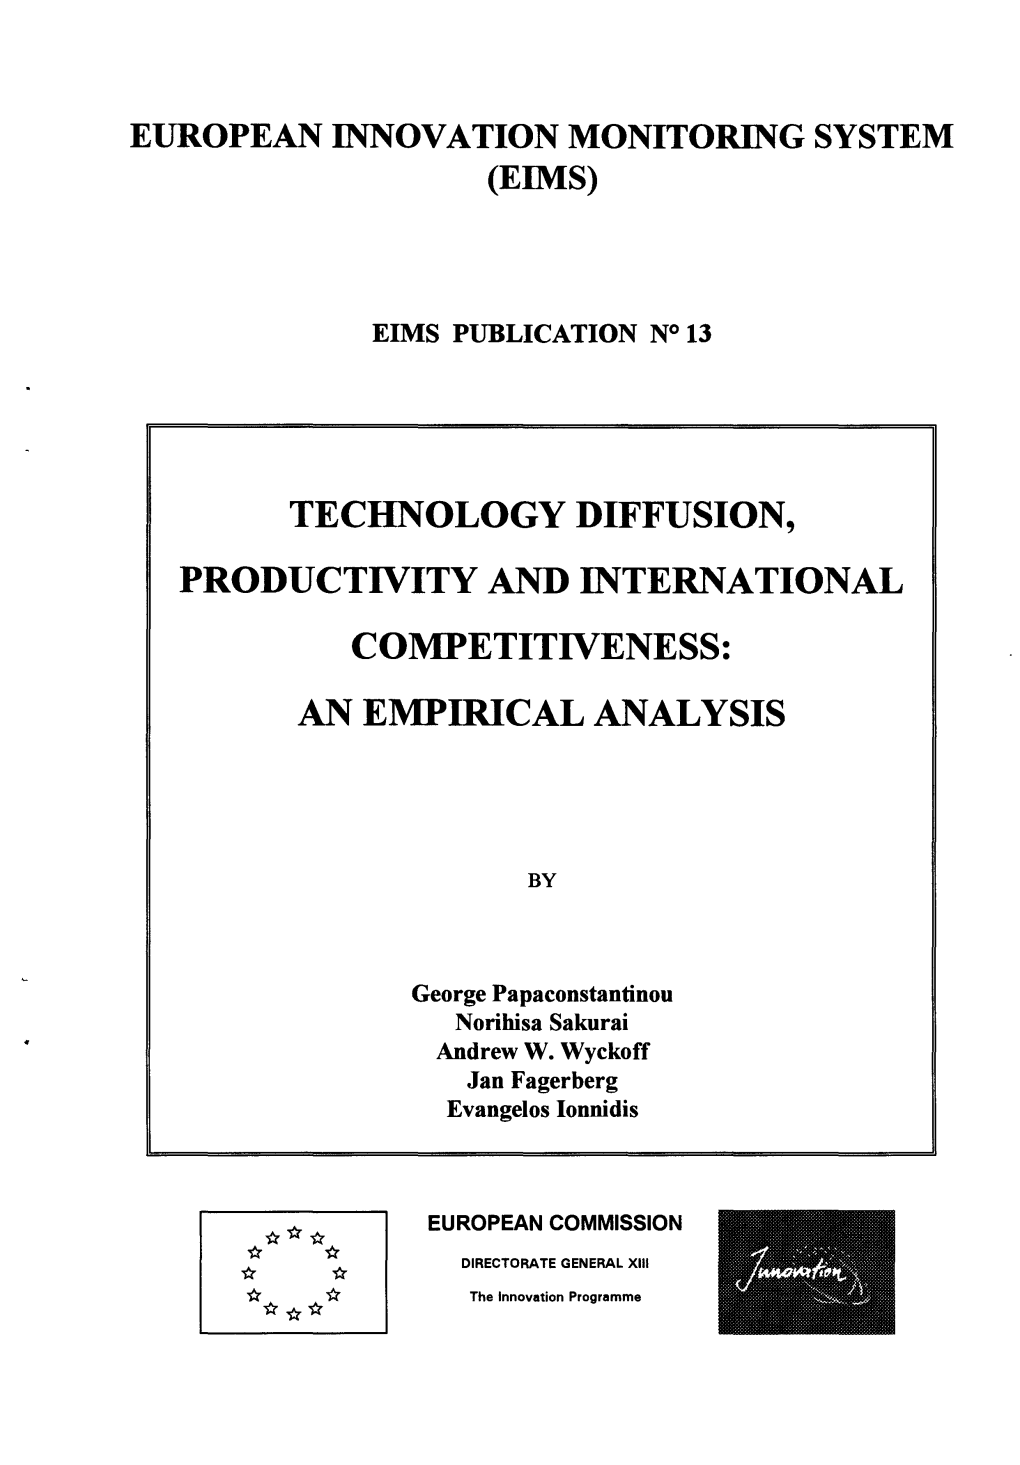 Technology Diffusion, Productivity and International Competitiveness: an Empirical Analysis